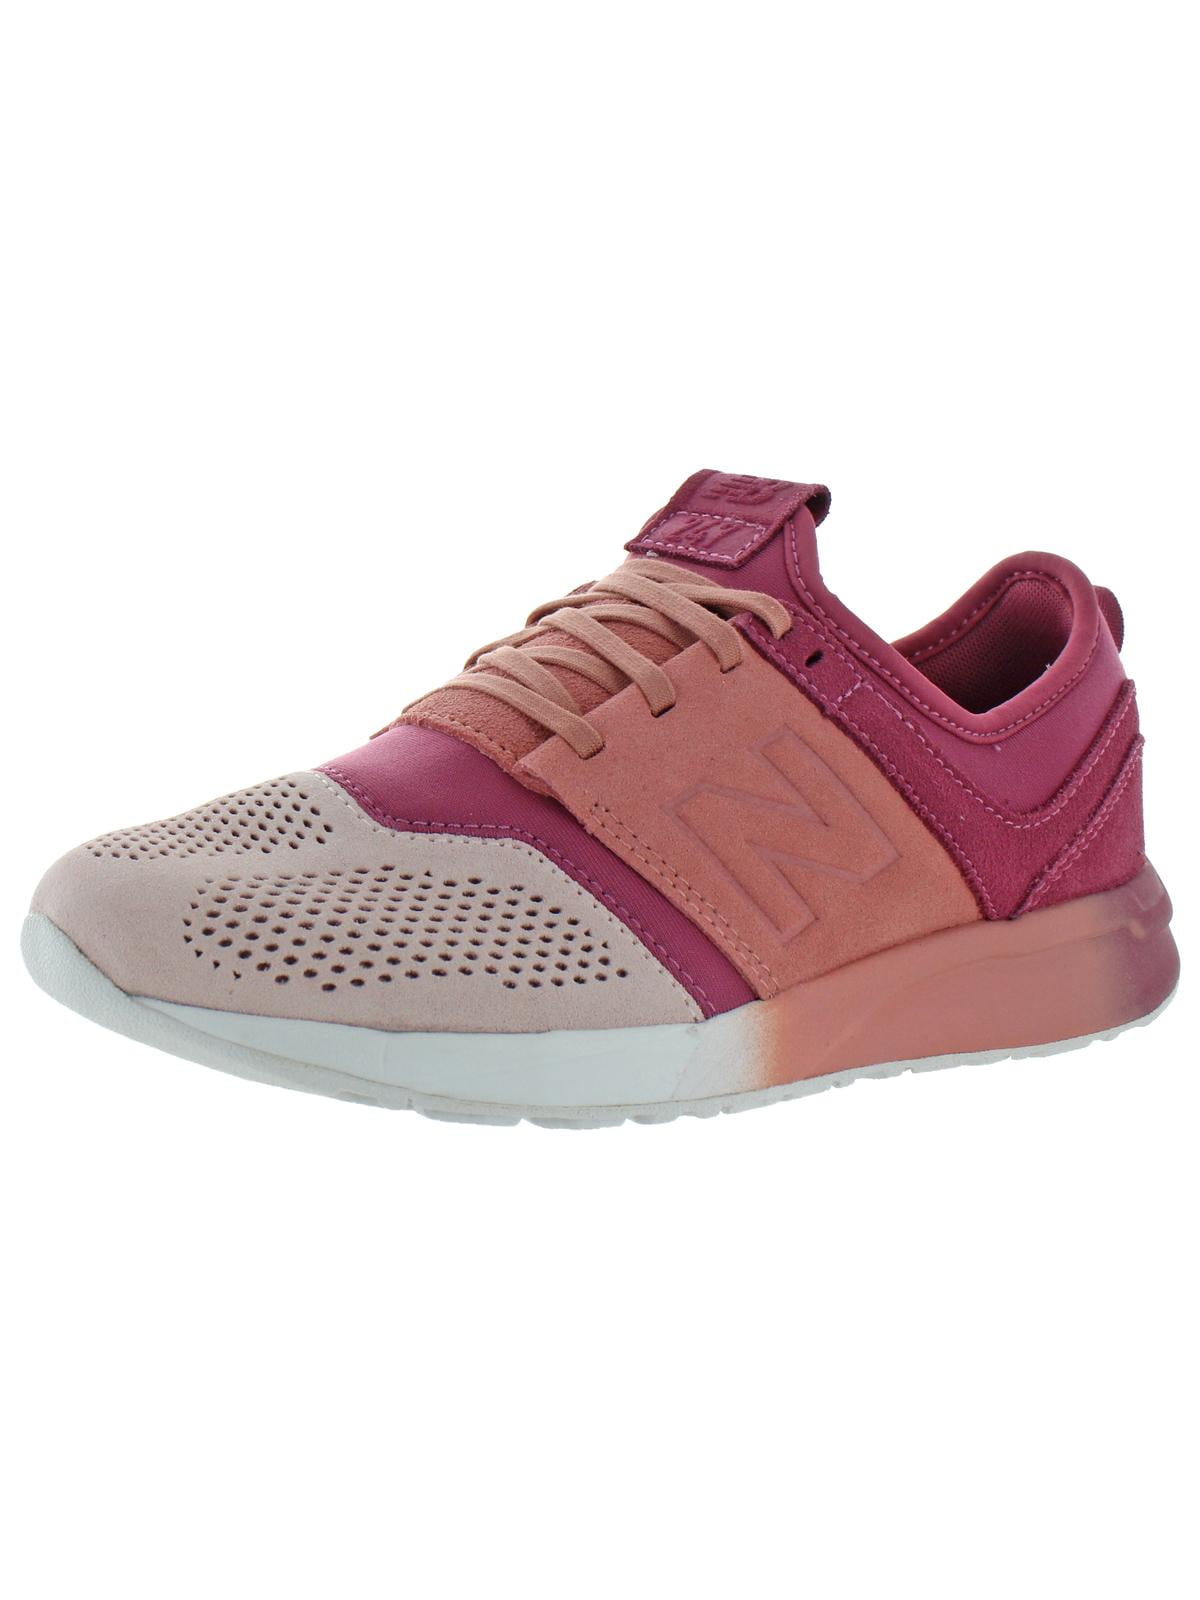 Match gøre det muligt for hoppe New Balance Girls 247 Suede Athleisure Fashion Sneakers - Walmart.com